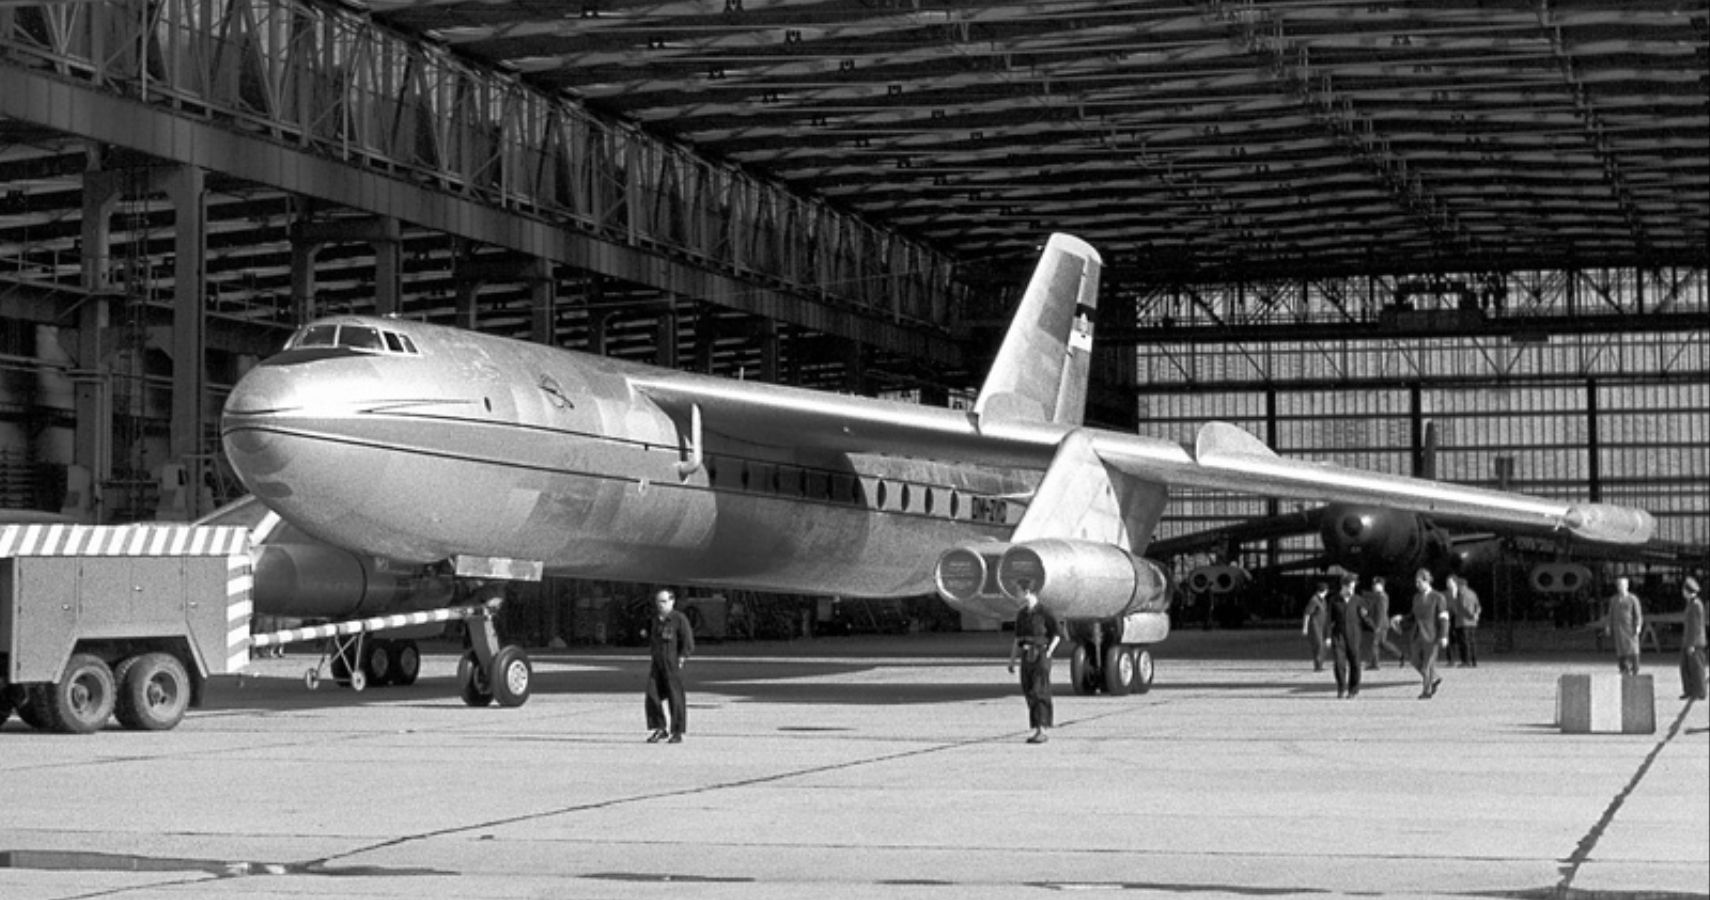 The Troubled East German Baade 152 Was Also The World’s Worst Jet Airliner